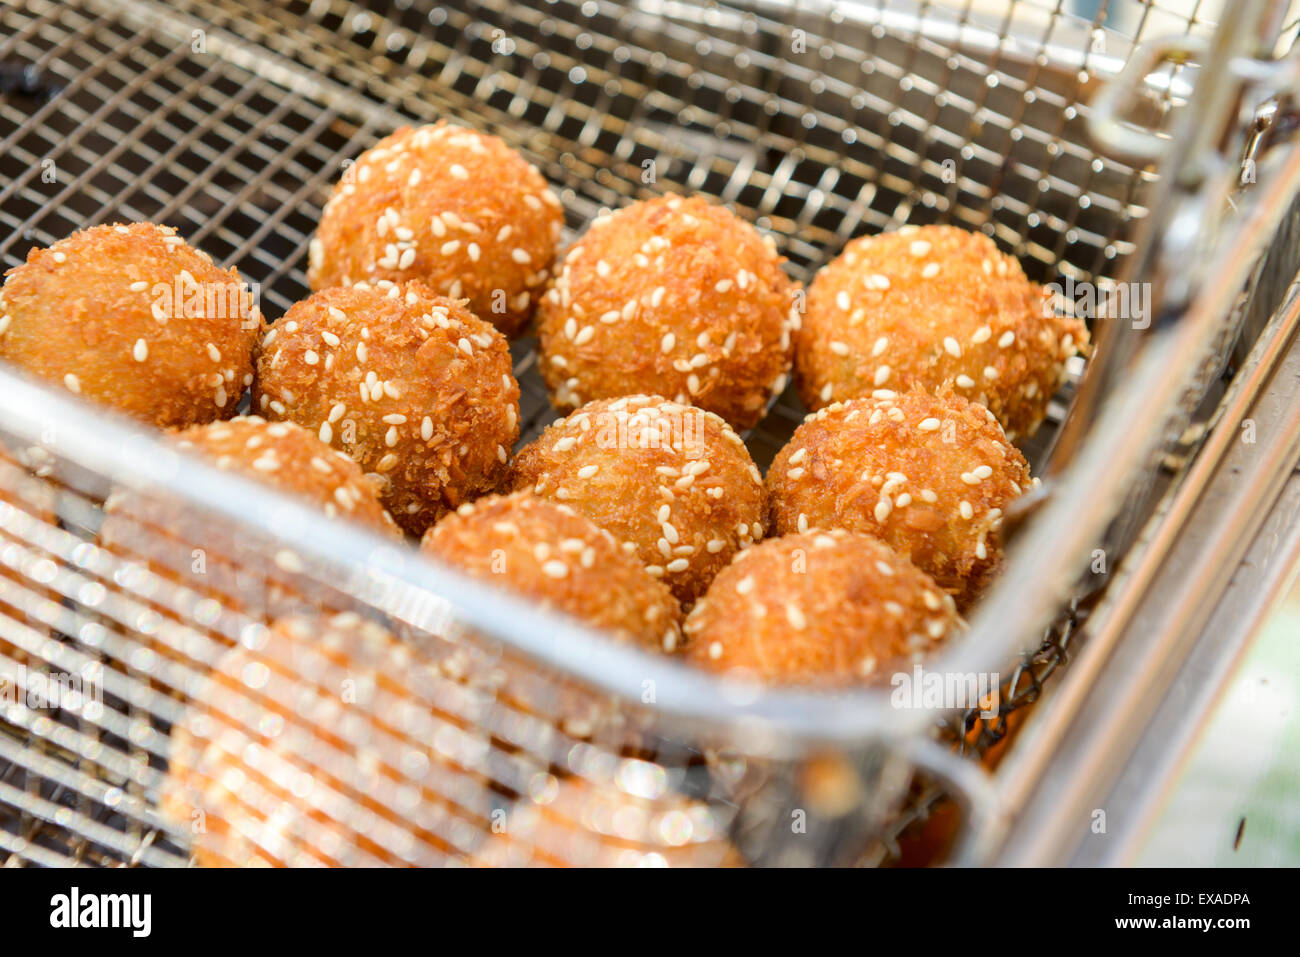 ruddy crispy cheese balls with spices in a metal grid Stock Photo